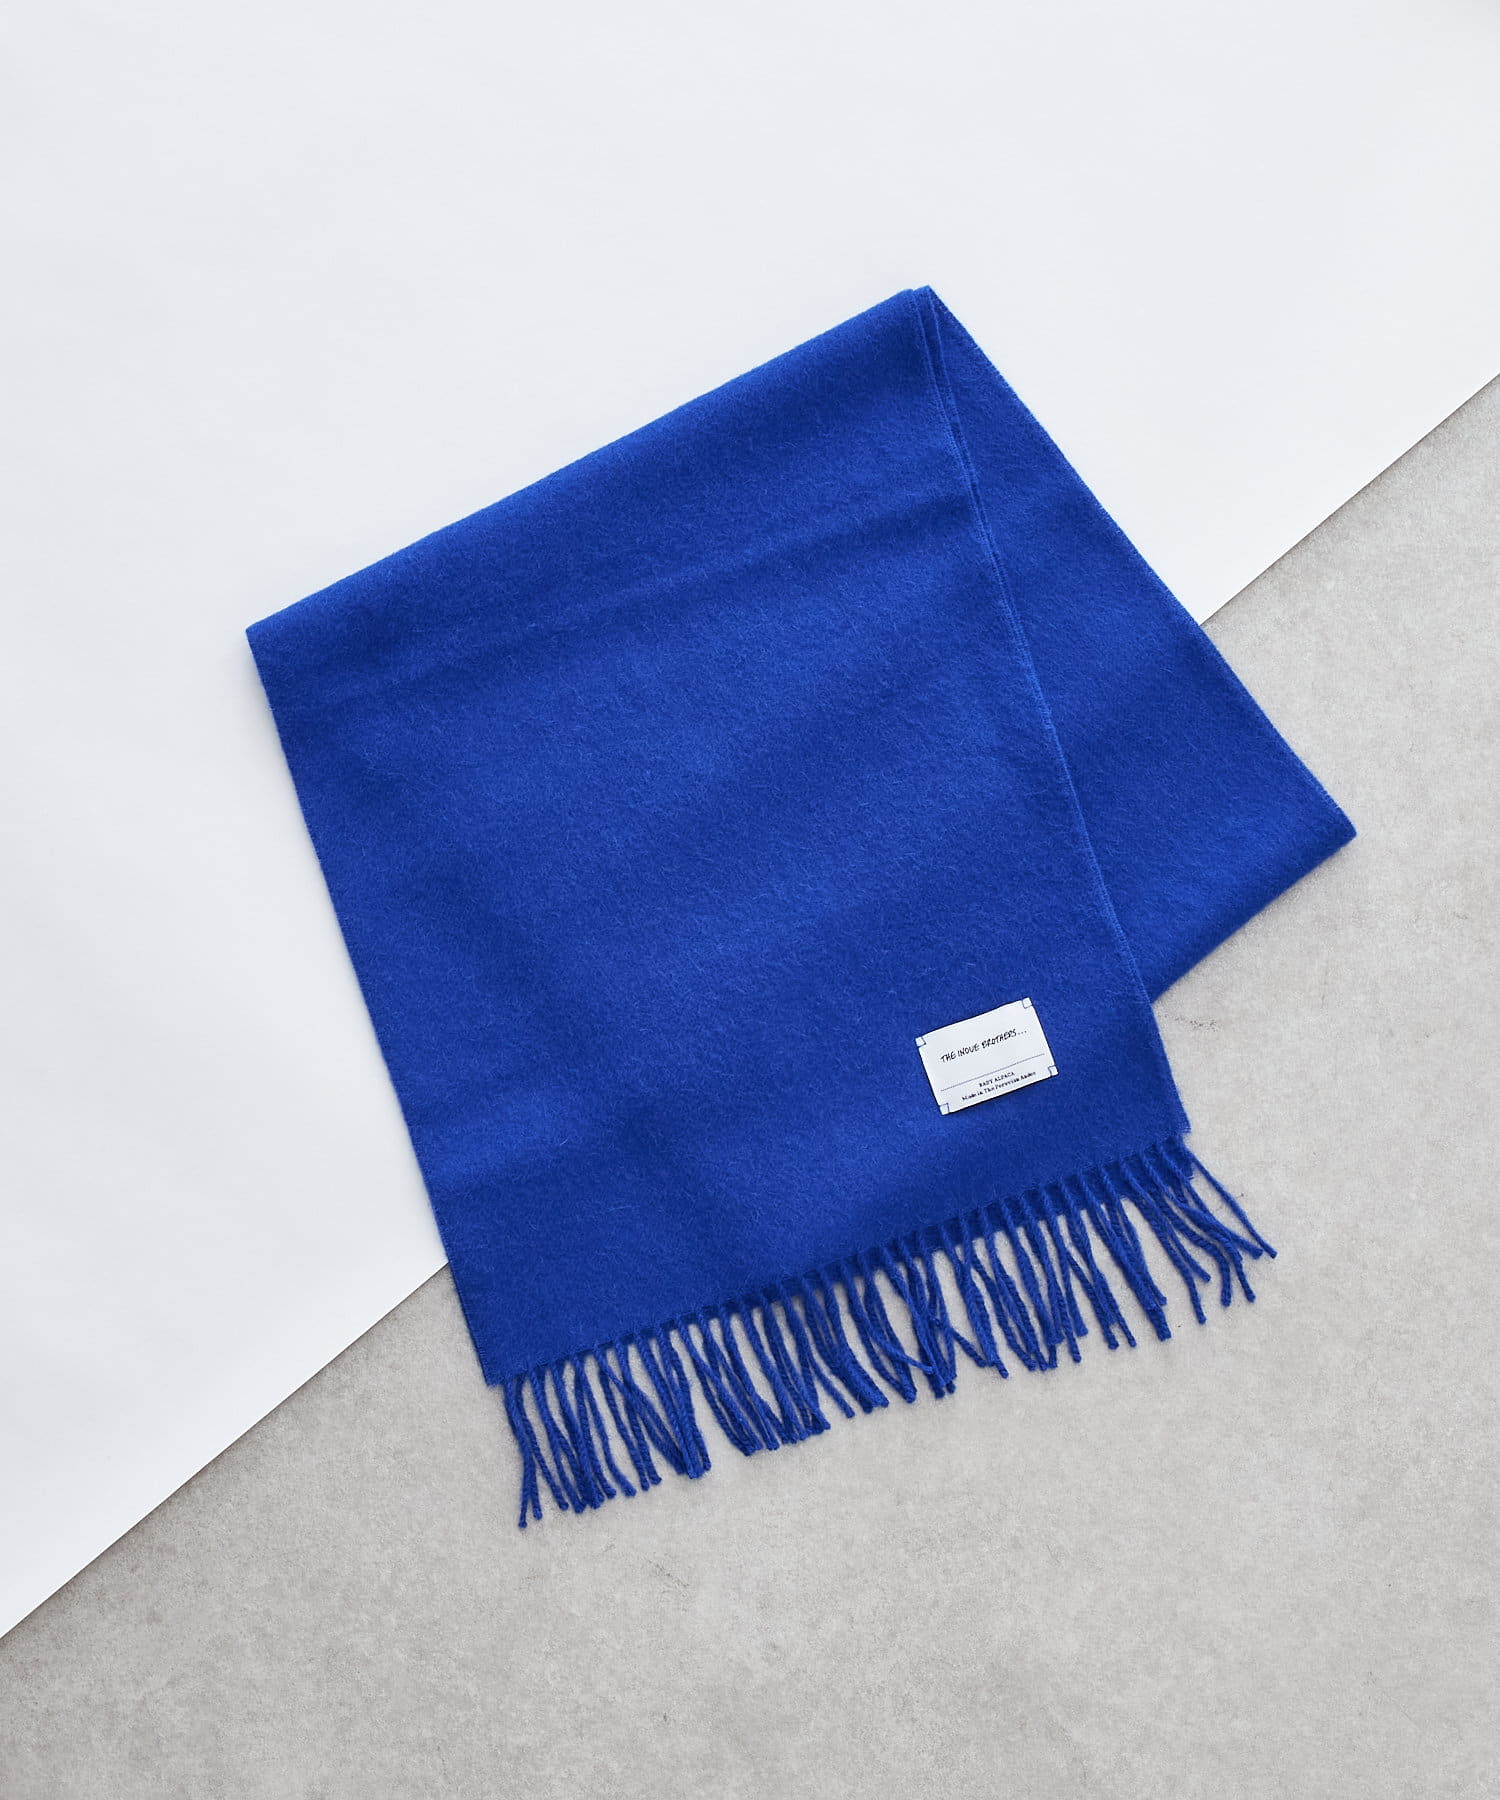 THE INOUE BROTHERSBrushed Scarf   Lui'sルイスメンズ   PAL